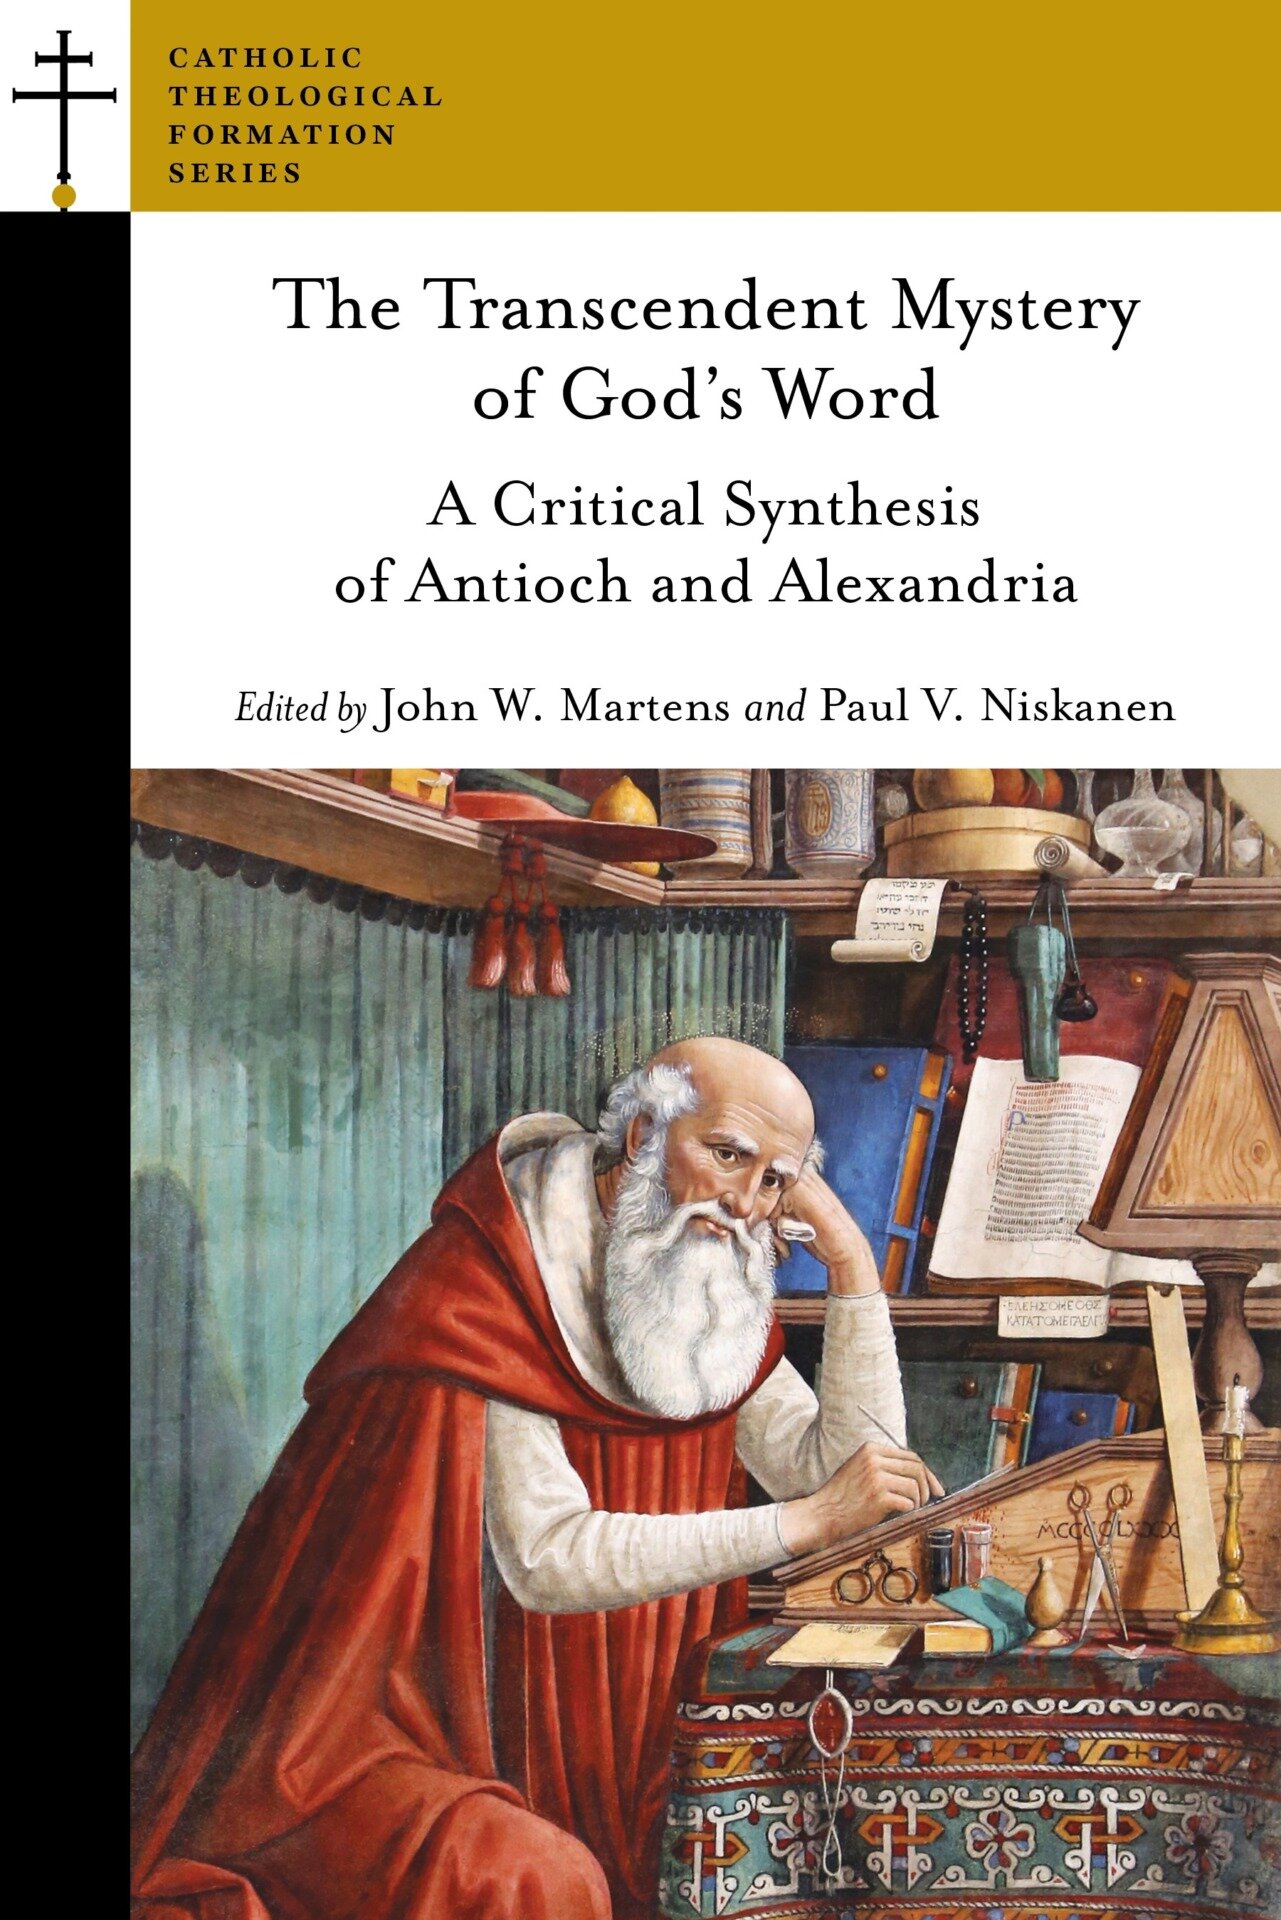 The Transcendent Mystery of God’s Word: A Critical Synthesis of Antioch and Alexandria (Catholic Theological Formation Series)